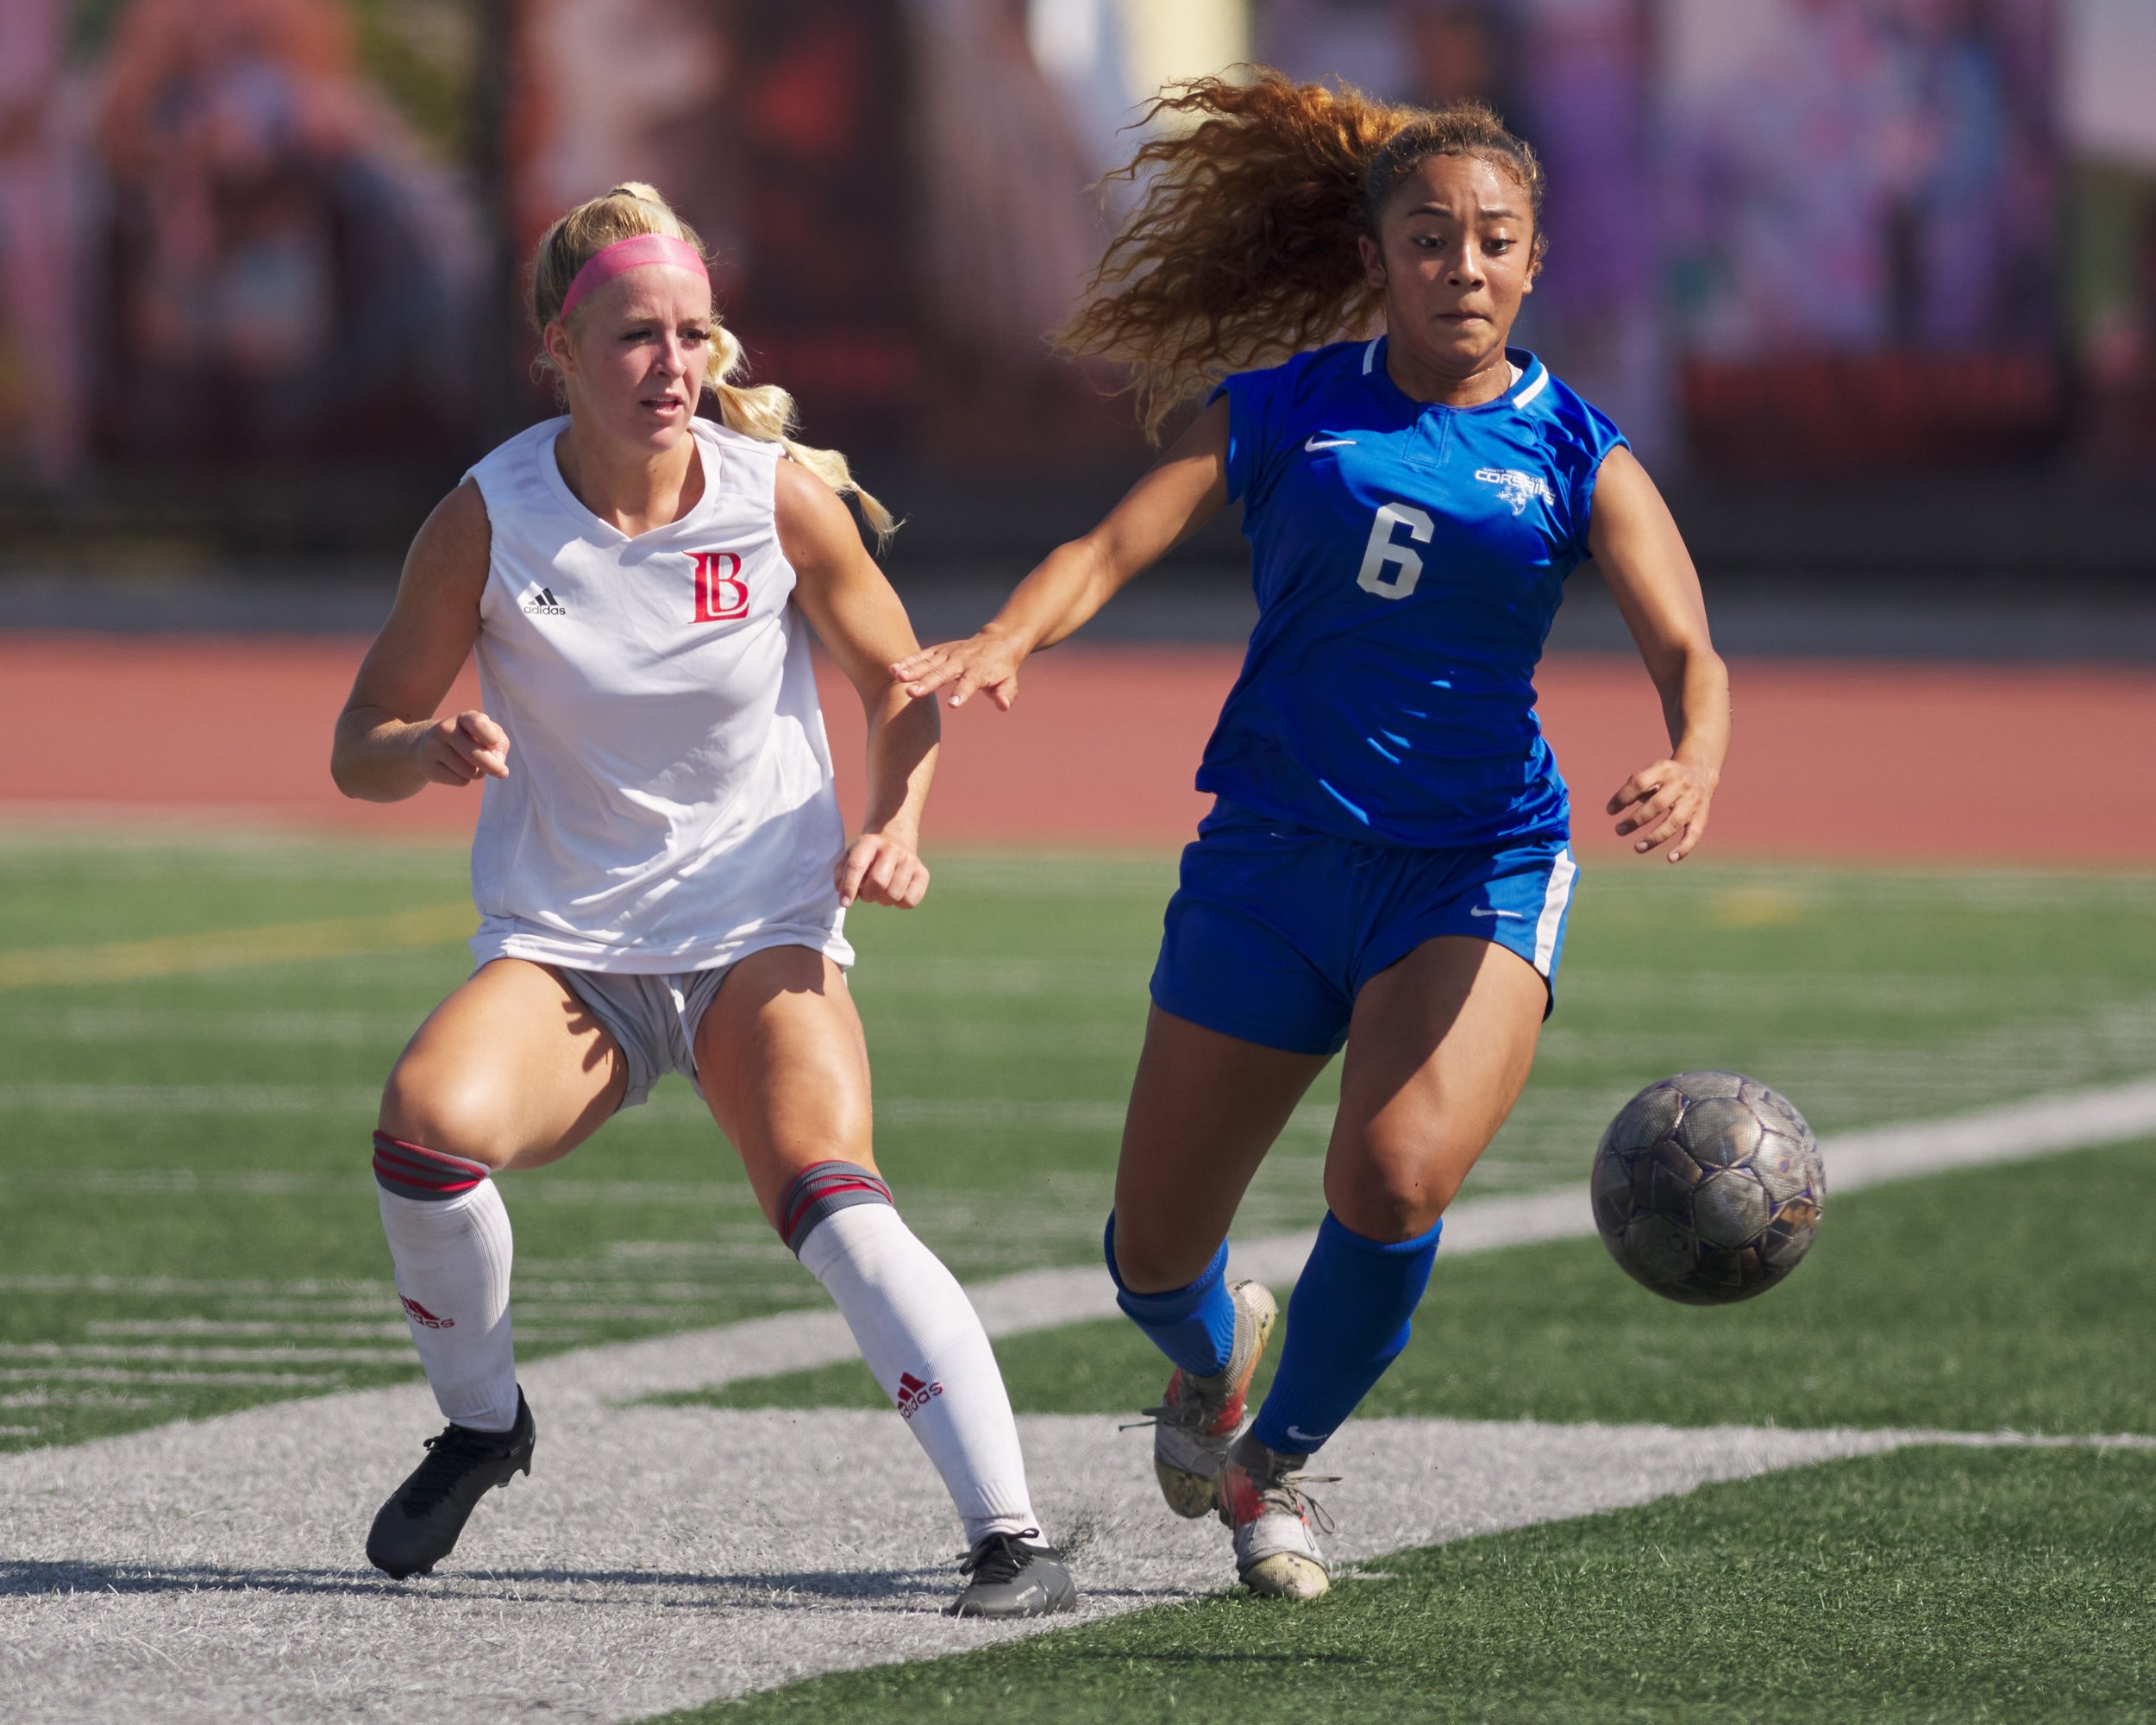  Long Beach City College Vikings' Hannah Marshall and Santa Monica College Corsairs' Tia Lucas during the women's soccer match on Friday, Sept. 15, 2023, at Corsair Field in Santa Monica, Calif. The Corsairs tied 0-0. (Nicholas McCall | The Corsair) 